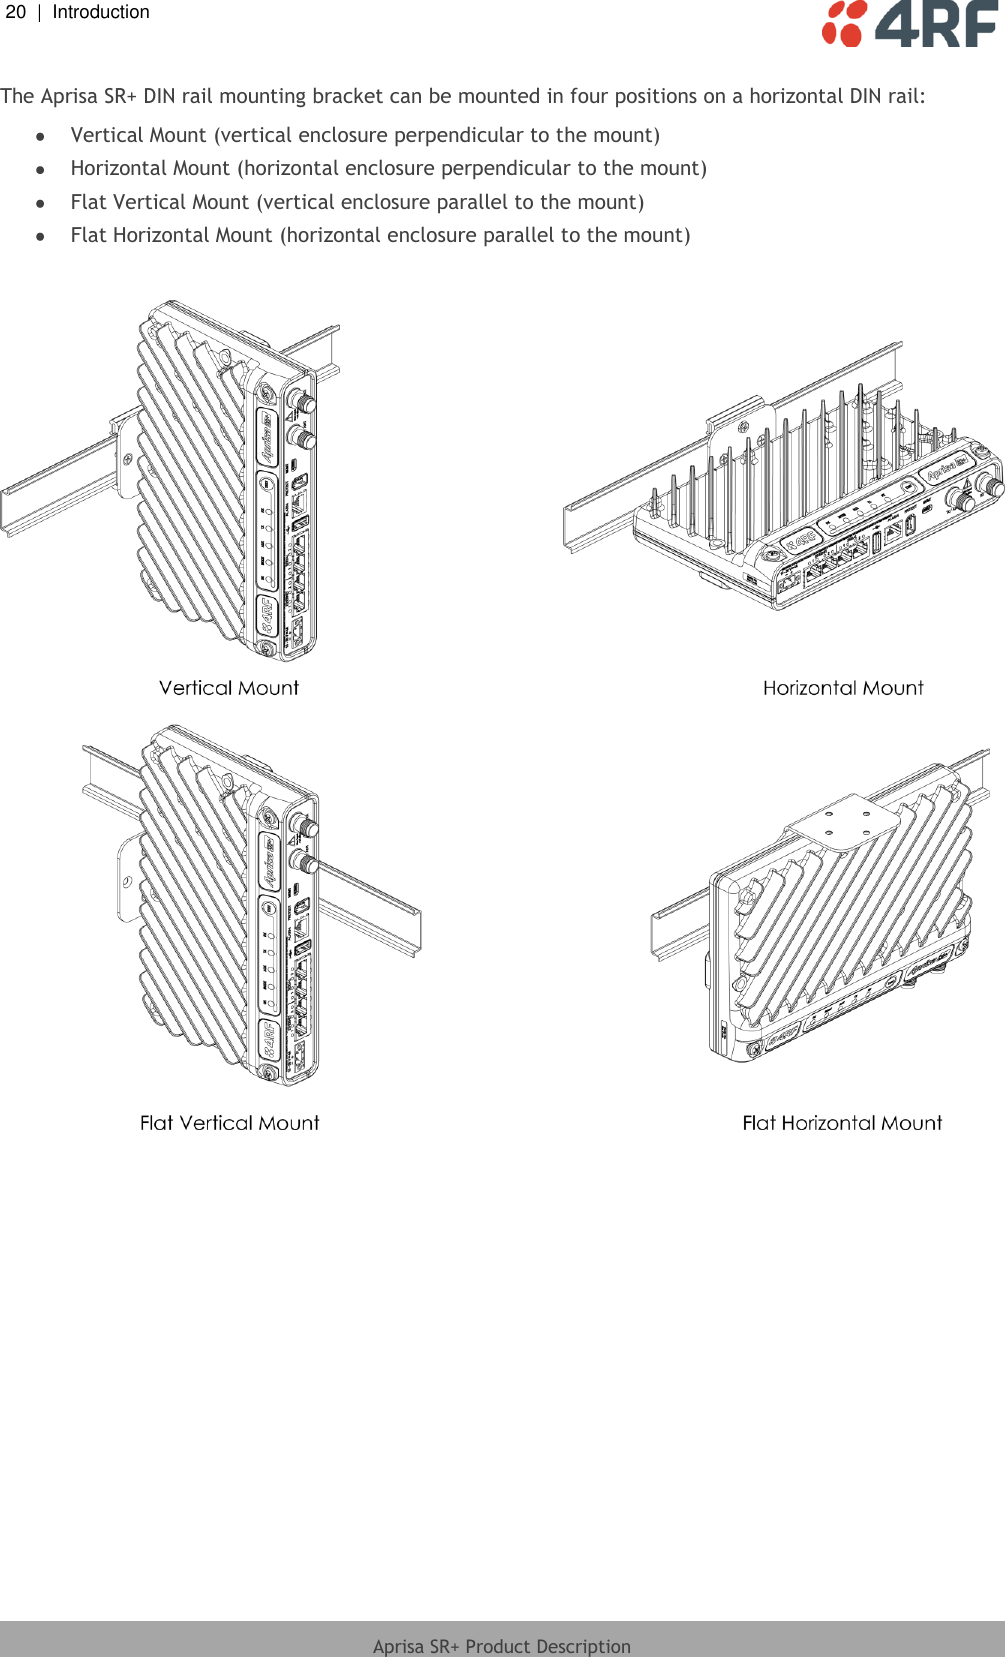 20  |  Introduction   Aprisa SR+ Product Description  The Aprisa SR+ DIN rail mounting bracket can be mounted in four positions on a horizontal DIN rail:  Vertical Mount (vertical enclosure perpendicular to the mount)  Horizontal Mount (horizontal enclosure perpendicular to the mount)  Flat Vertical Mount (vertical enclosure parallel to the mount)  Flat Horizontal Mount (horizontal enclosure parallel to the mount)    